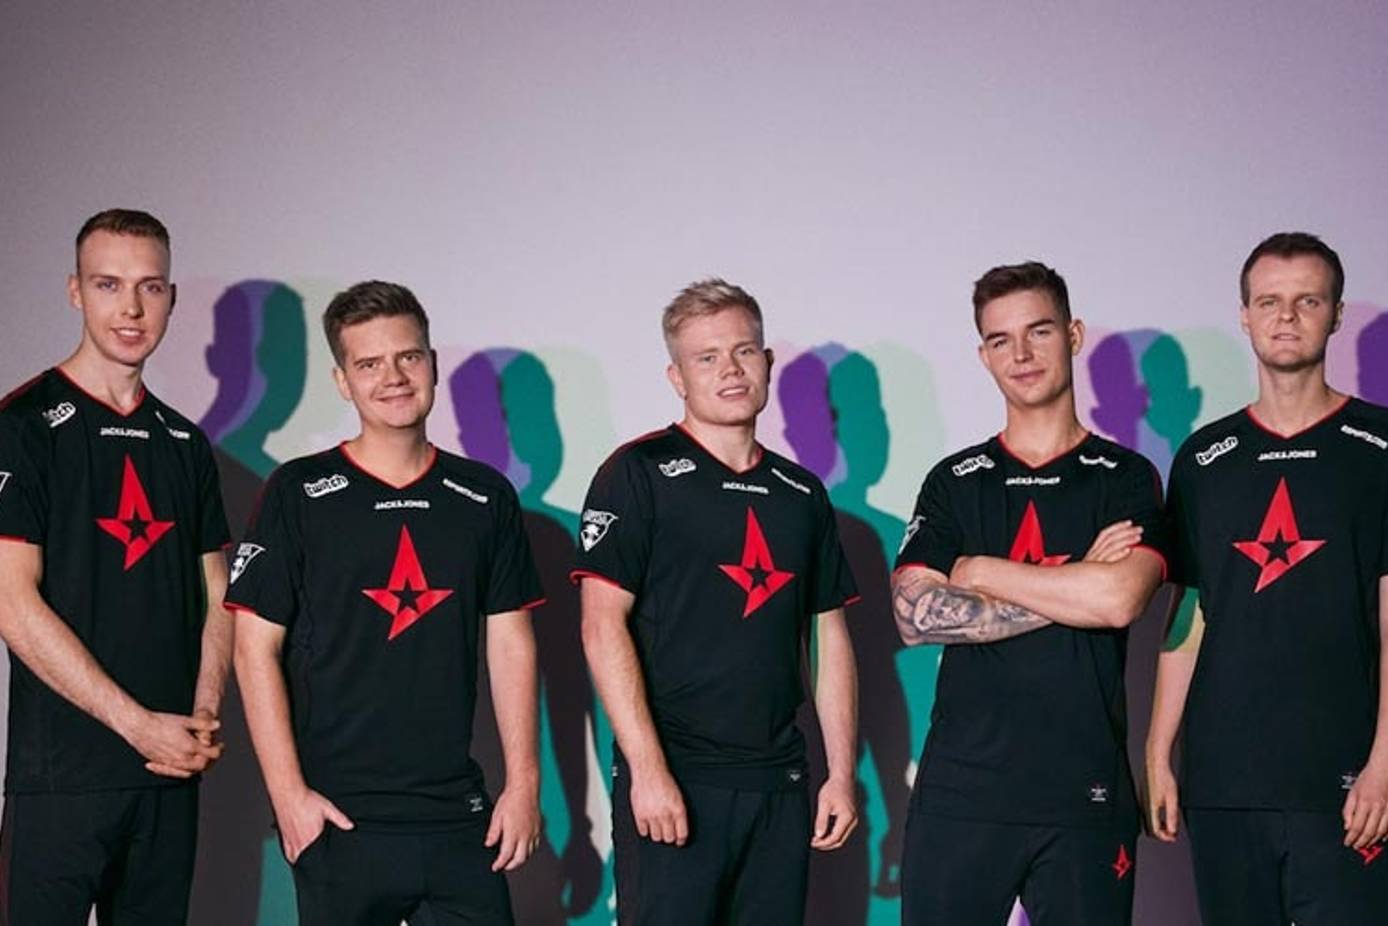 JACK & JONES AND ASTRALIS RELEASE THE NEW PLAYERS JERSEY AND MERCHANDISE